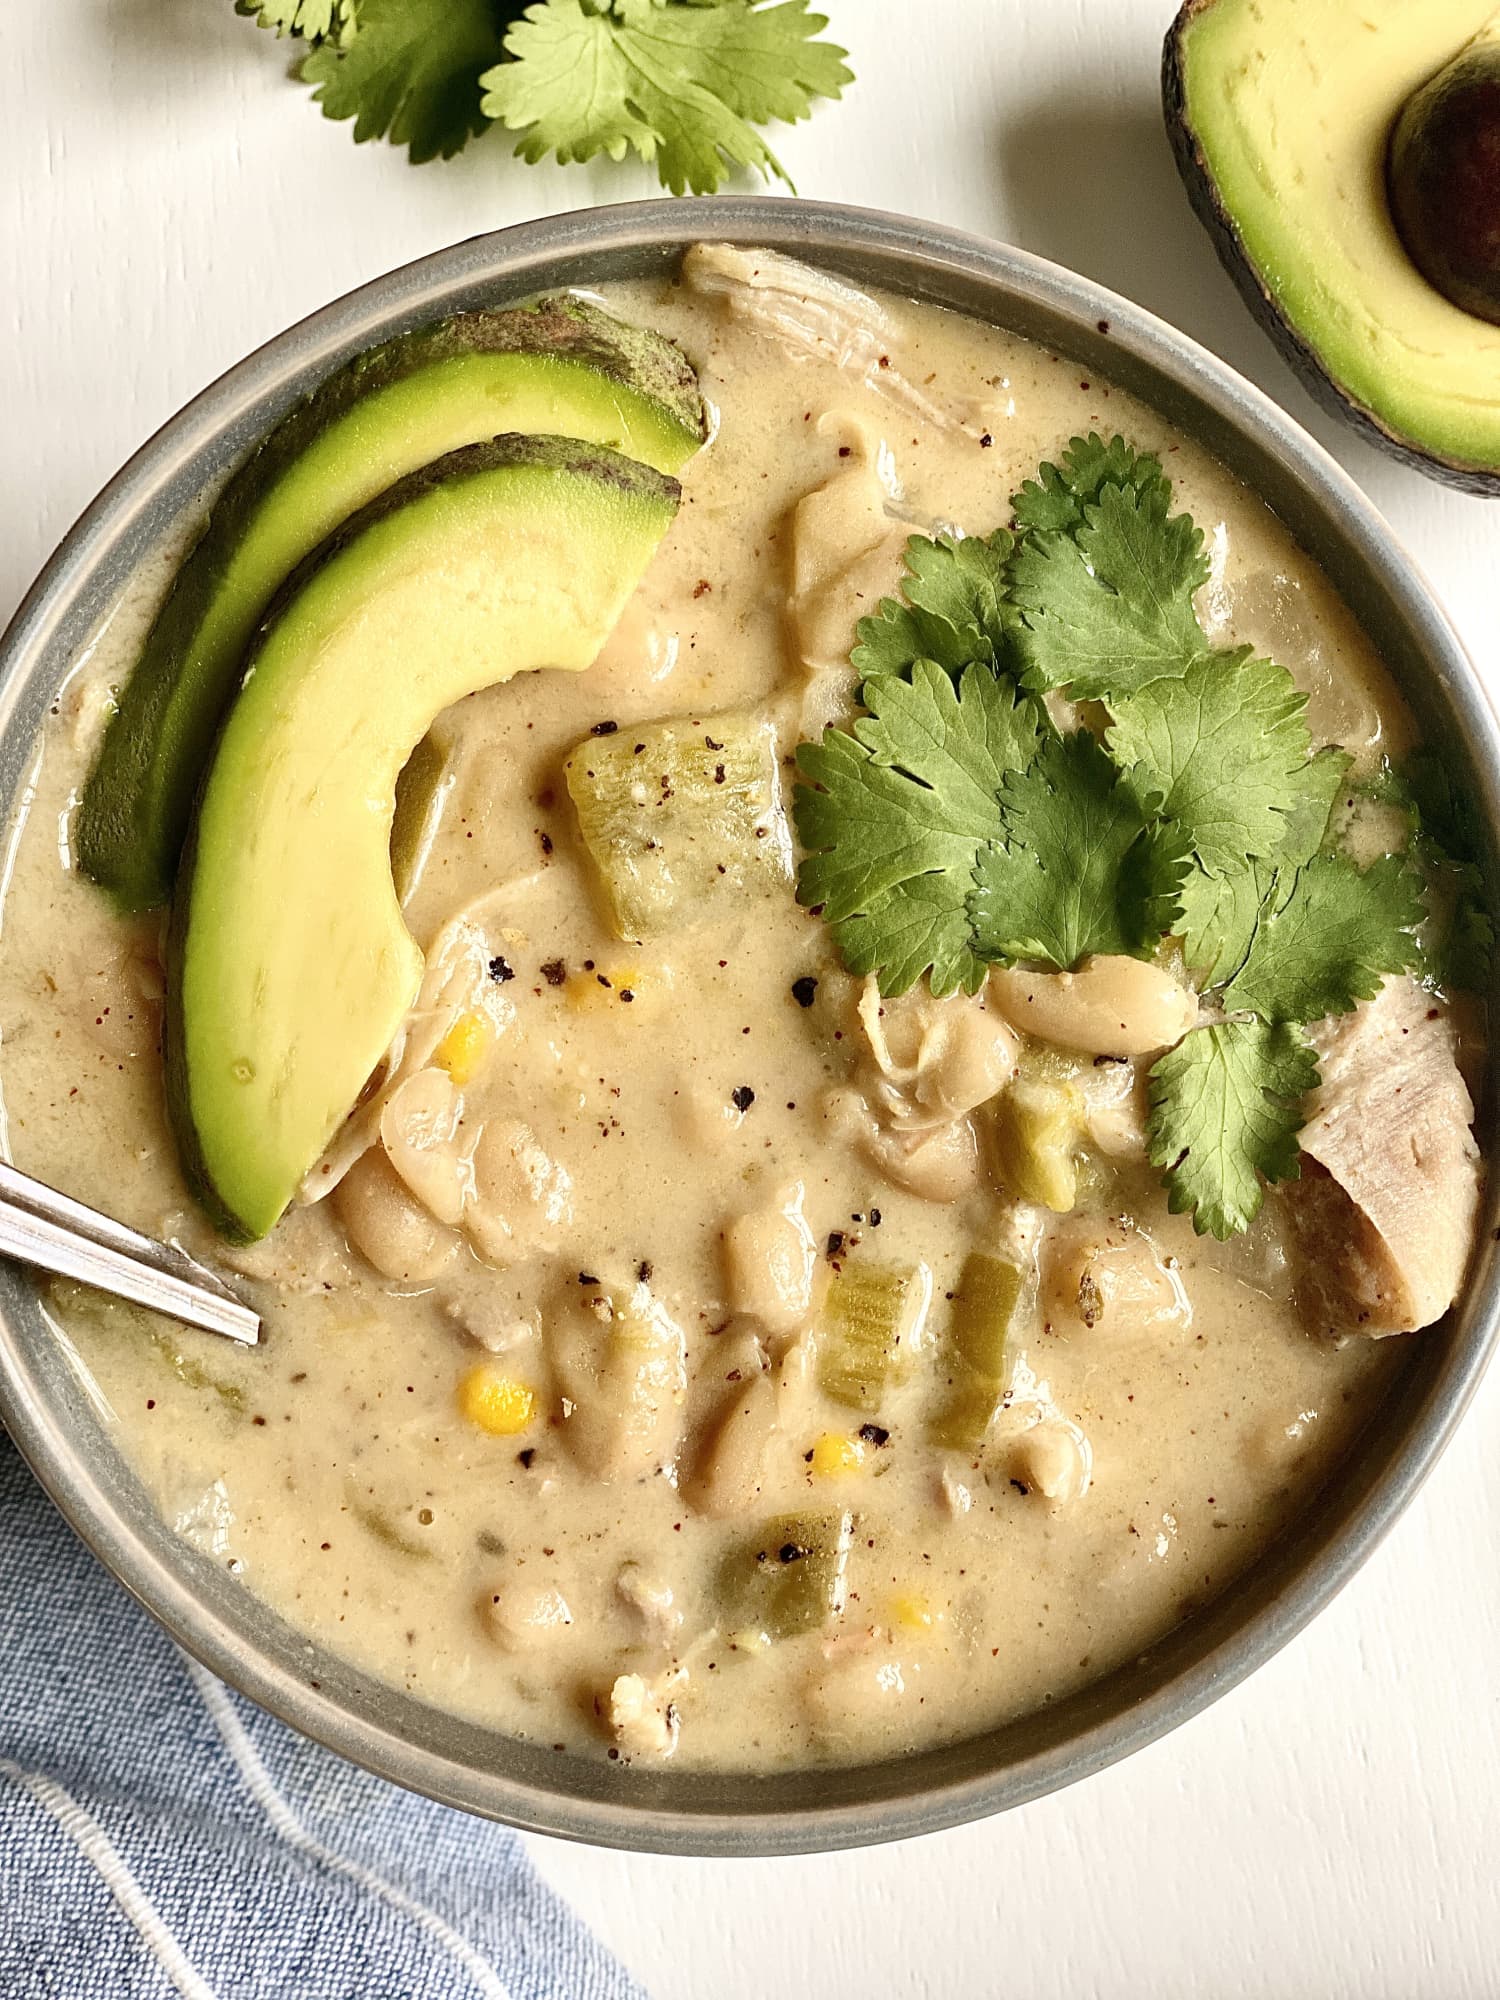 This One Surprising Ingredient Is the Key to the Most Irresistible White Chicken Chili